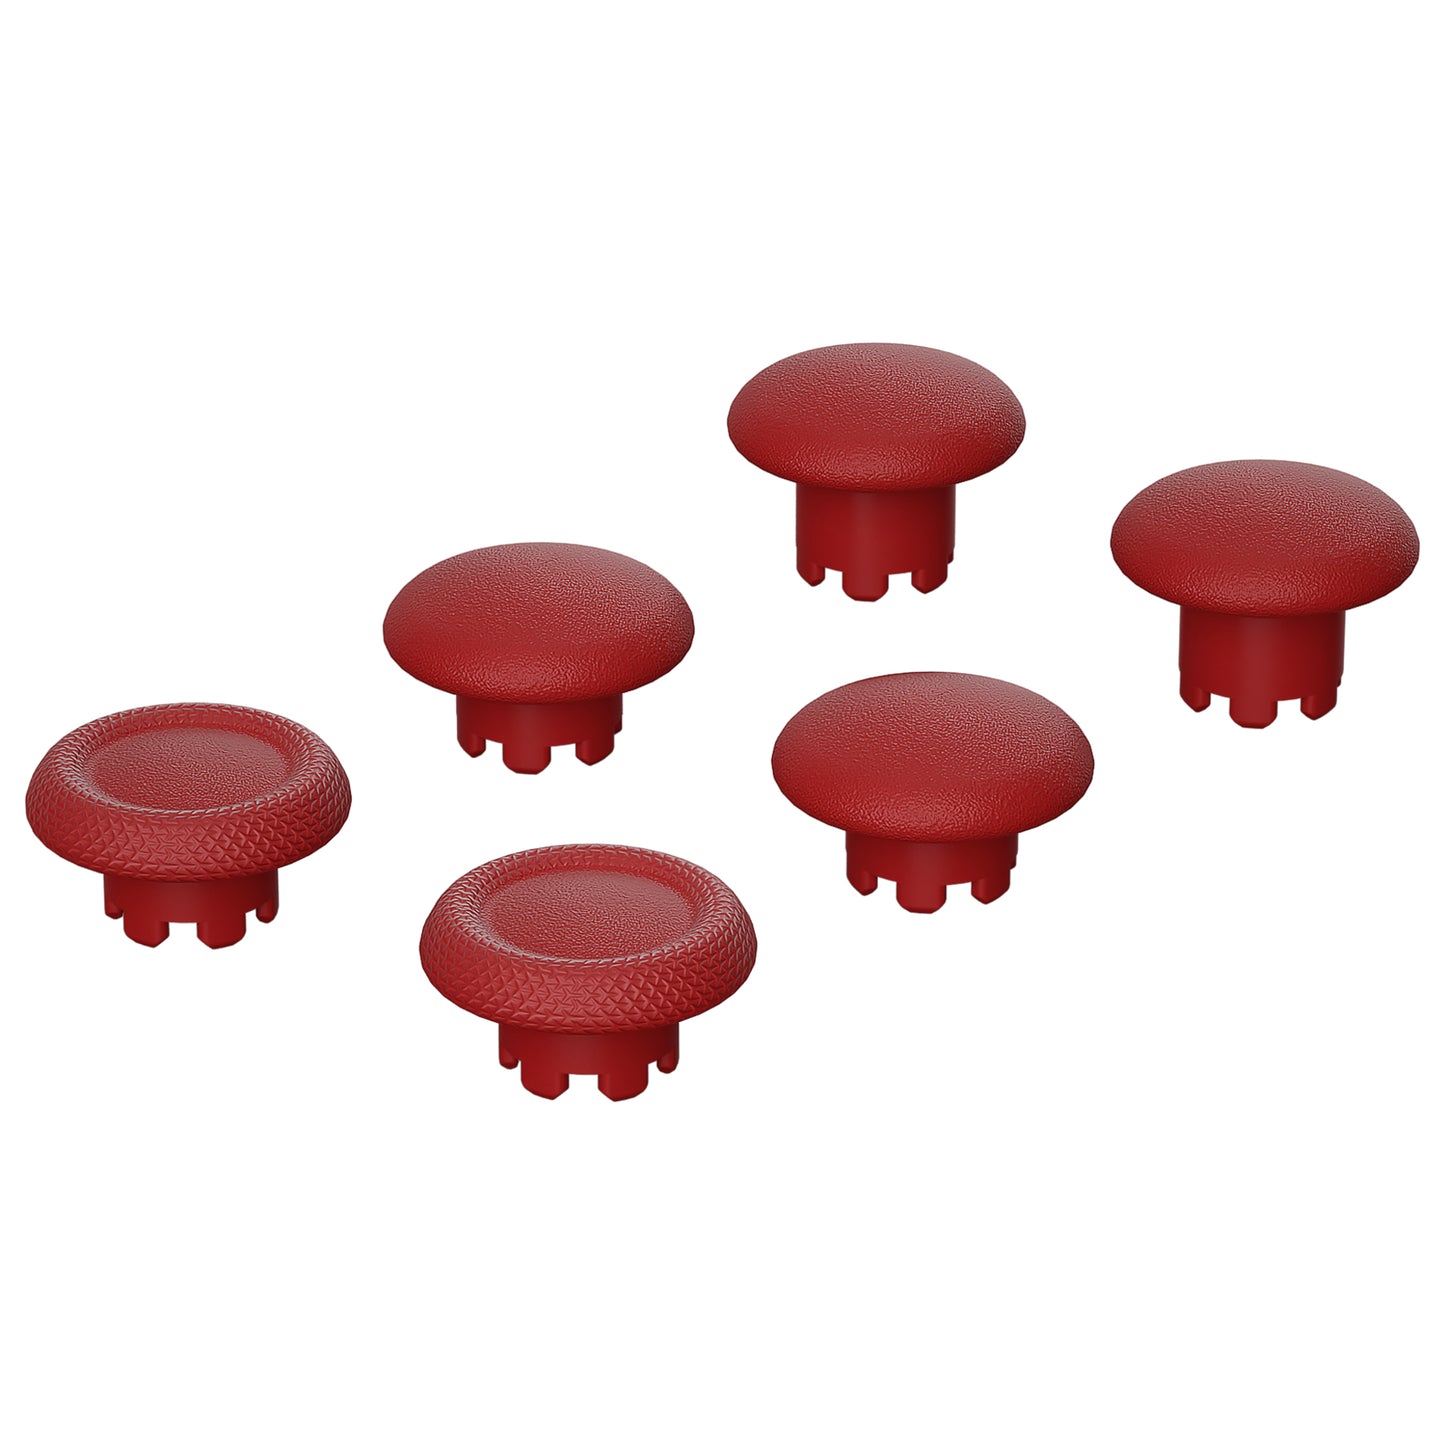 eXtremeRate Replacement Swappable Thumbsticks for PS5 Edge Controller - Carmine Red eXtremeRate